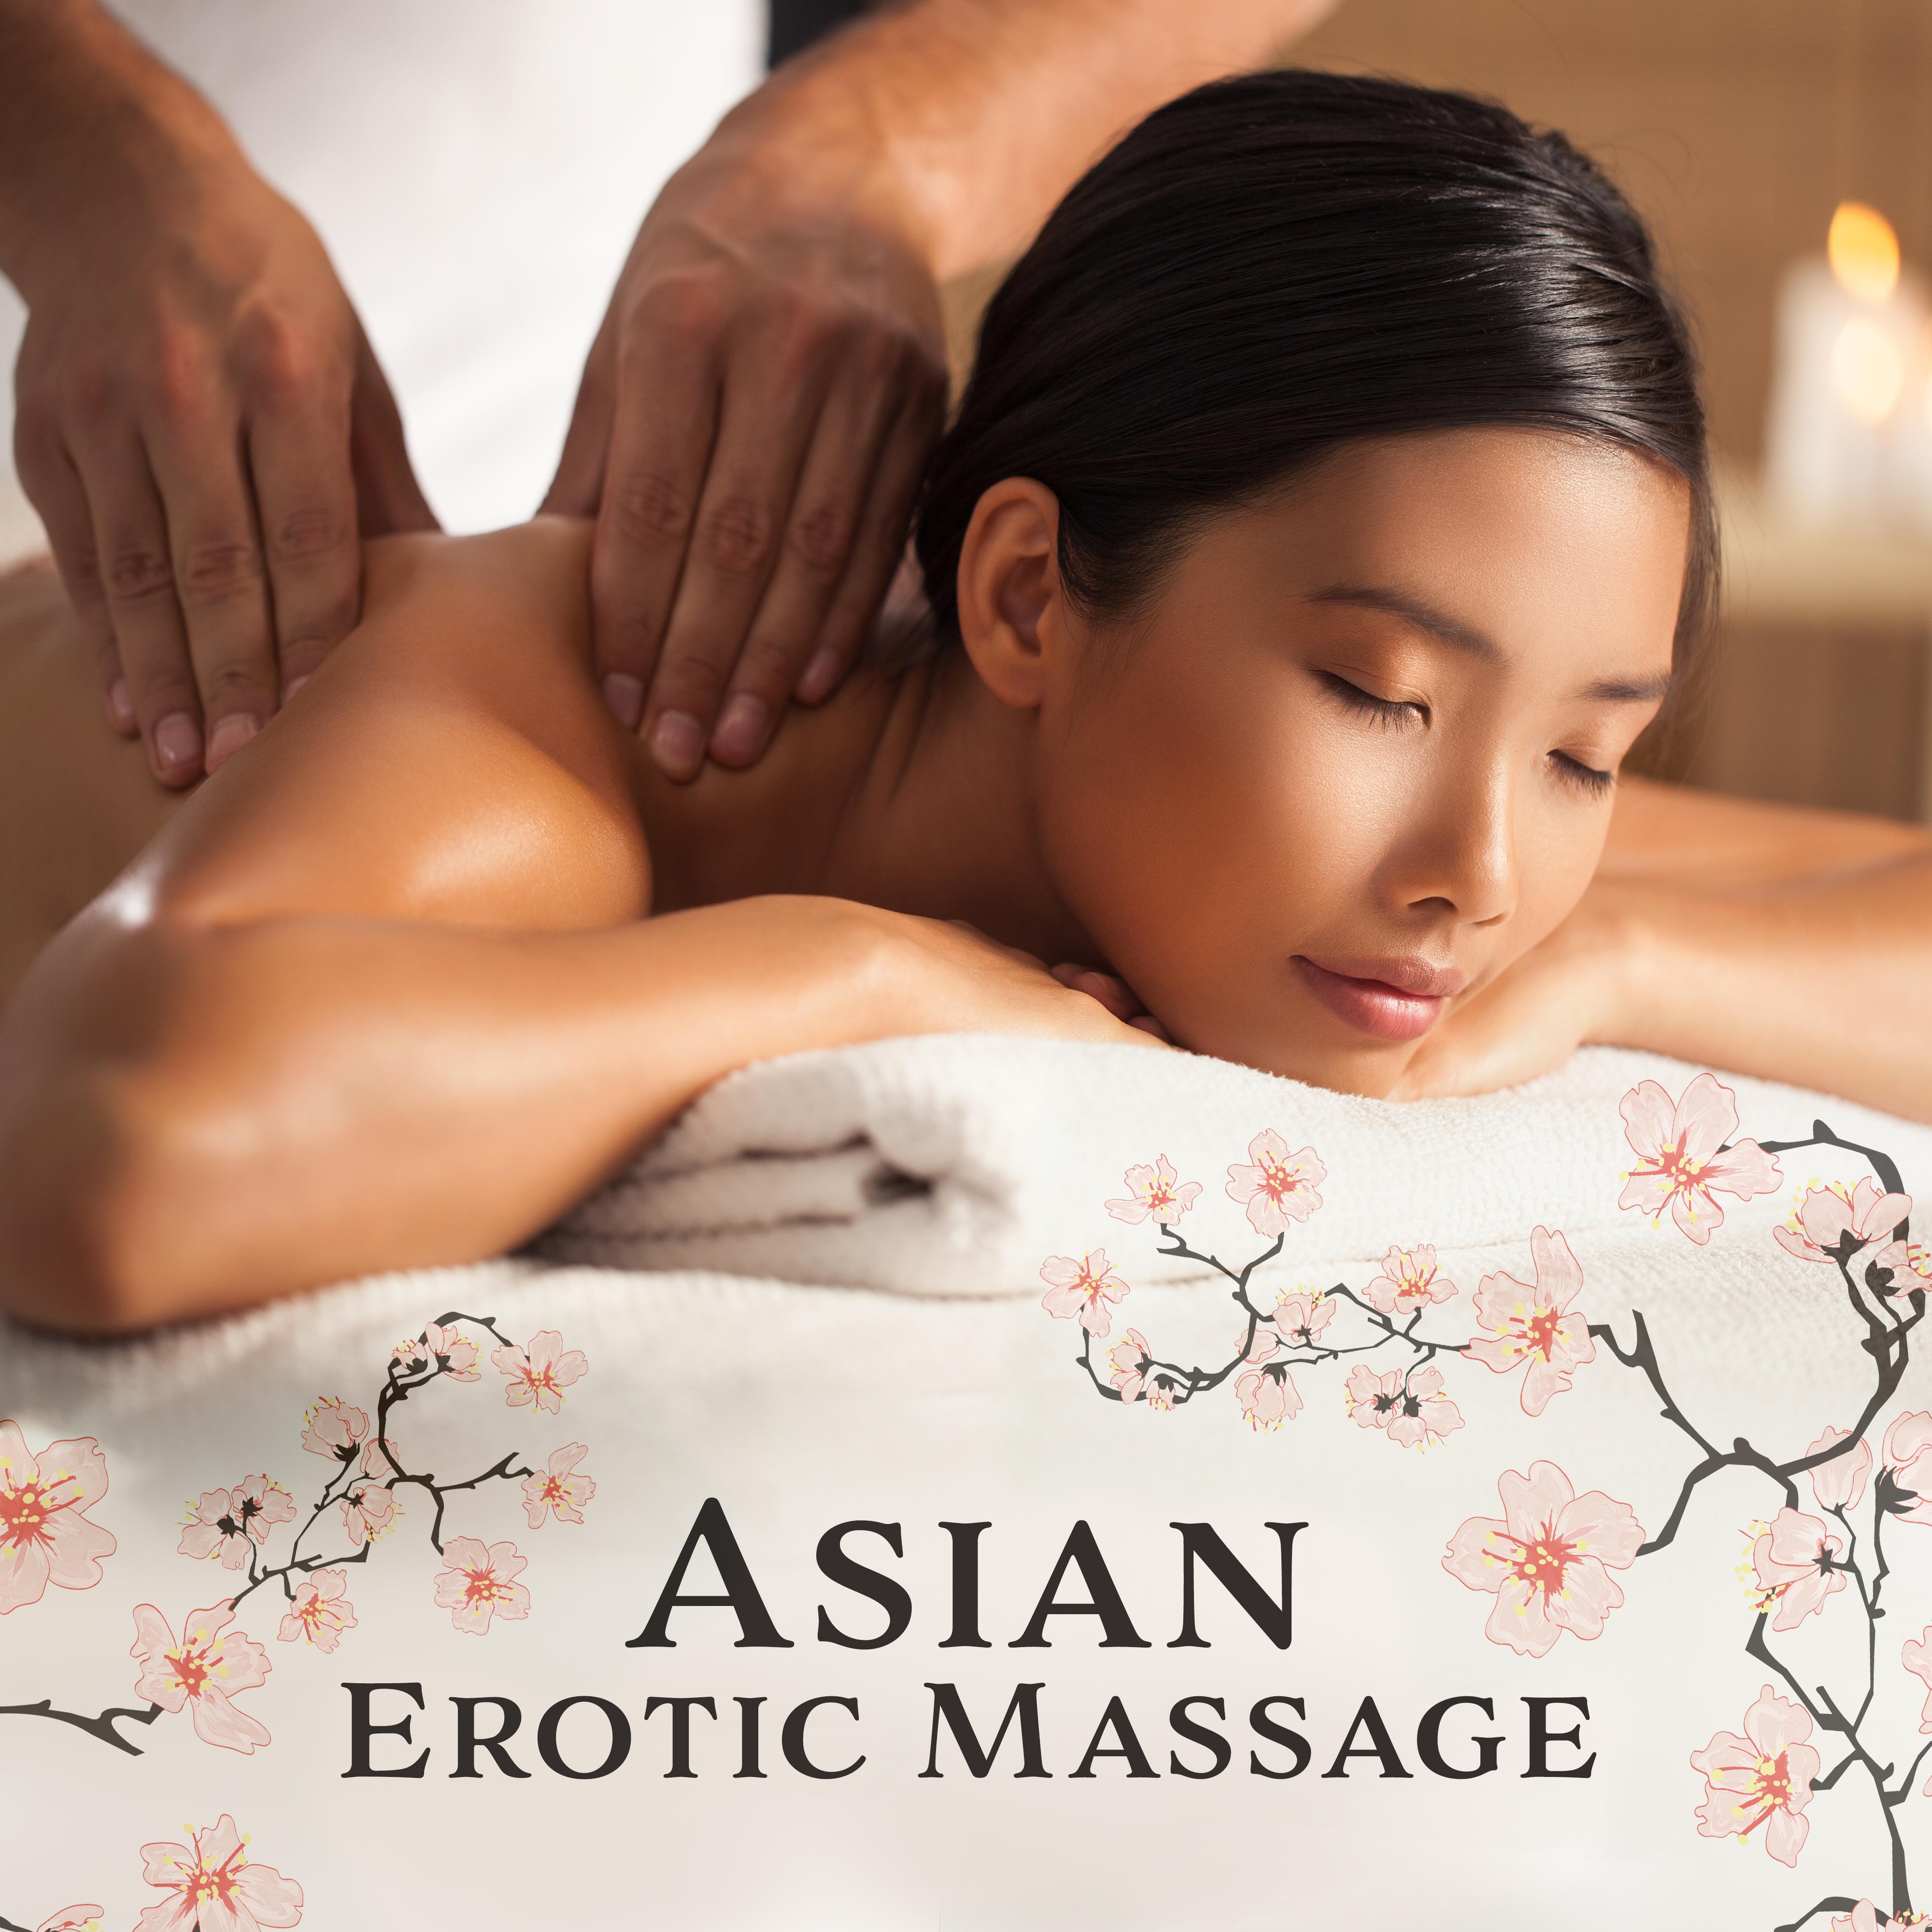 Asian Erotic Massage – Tantric Music for Relaxation, Zen Lounge, Inner Harmony, Calming Sounds to Rest, Spa & Wellness, Massage Music, Lounge